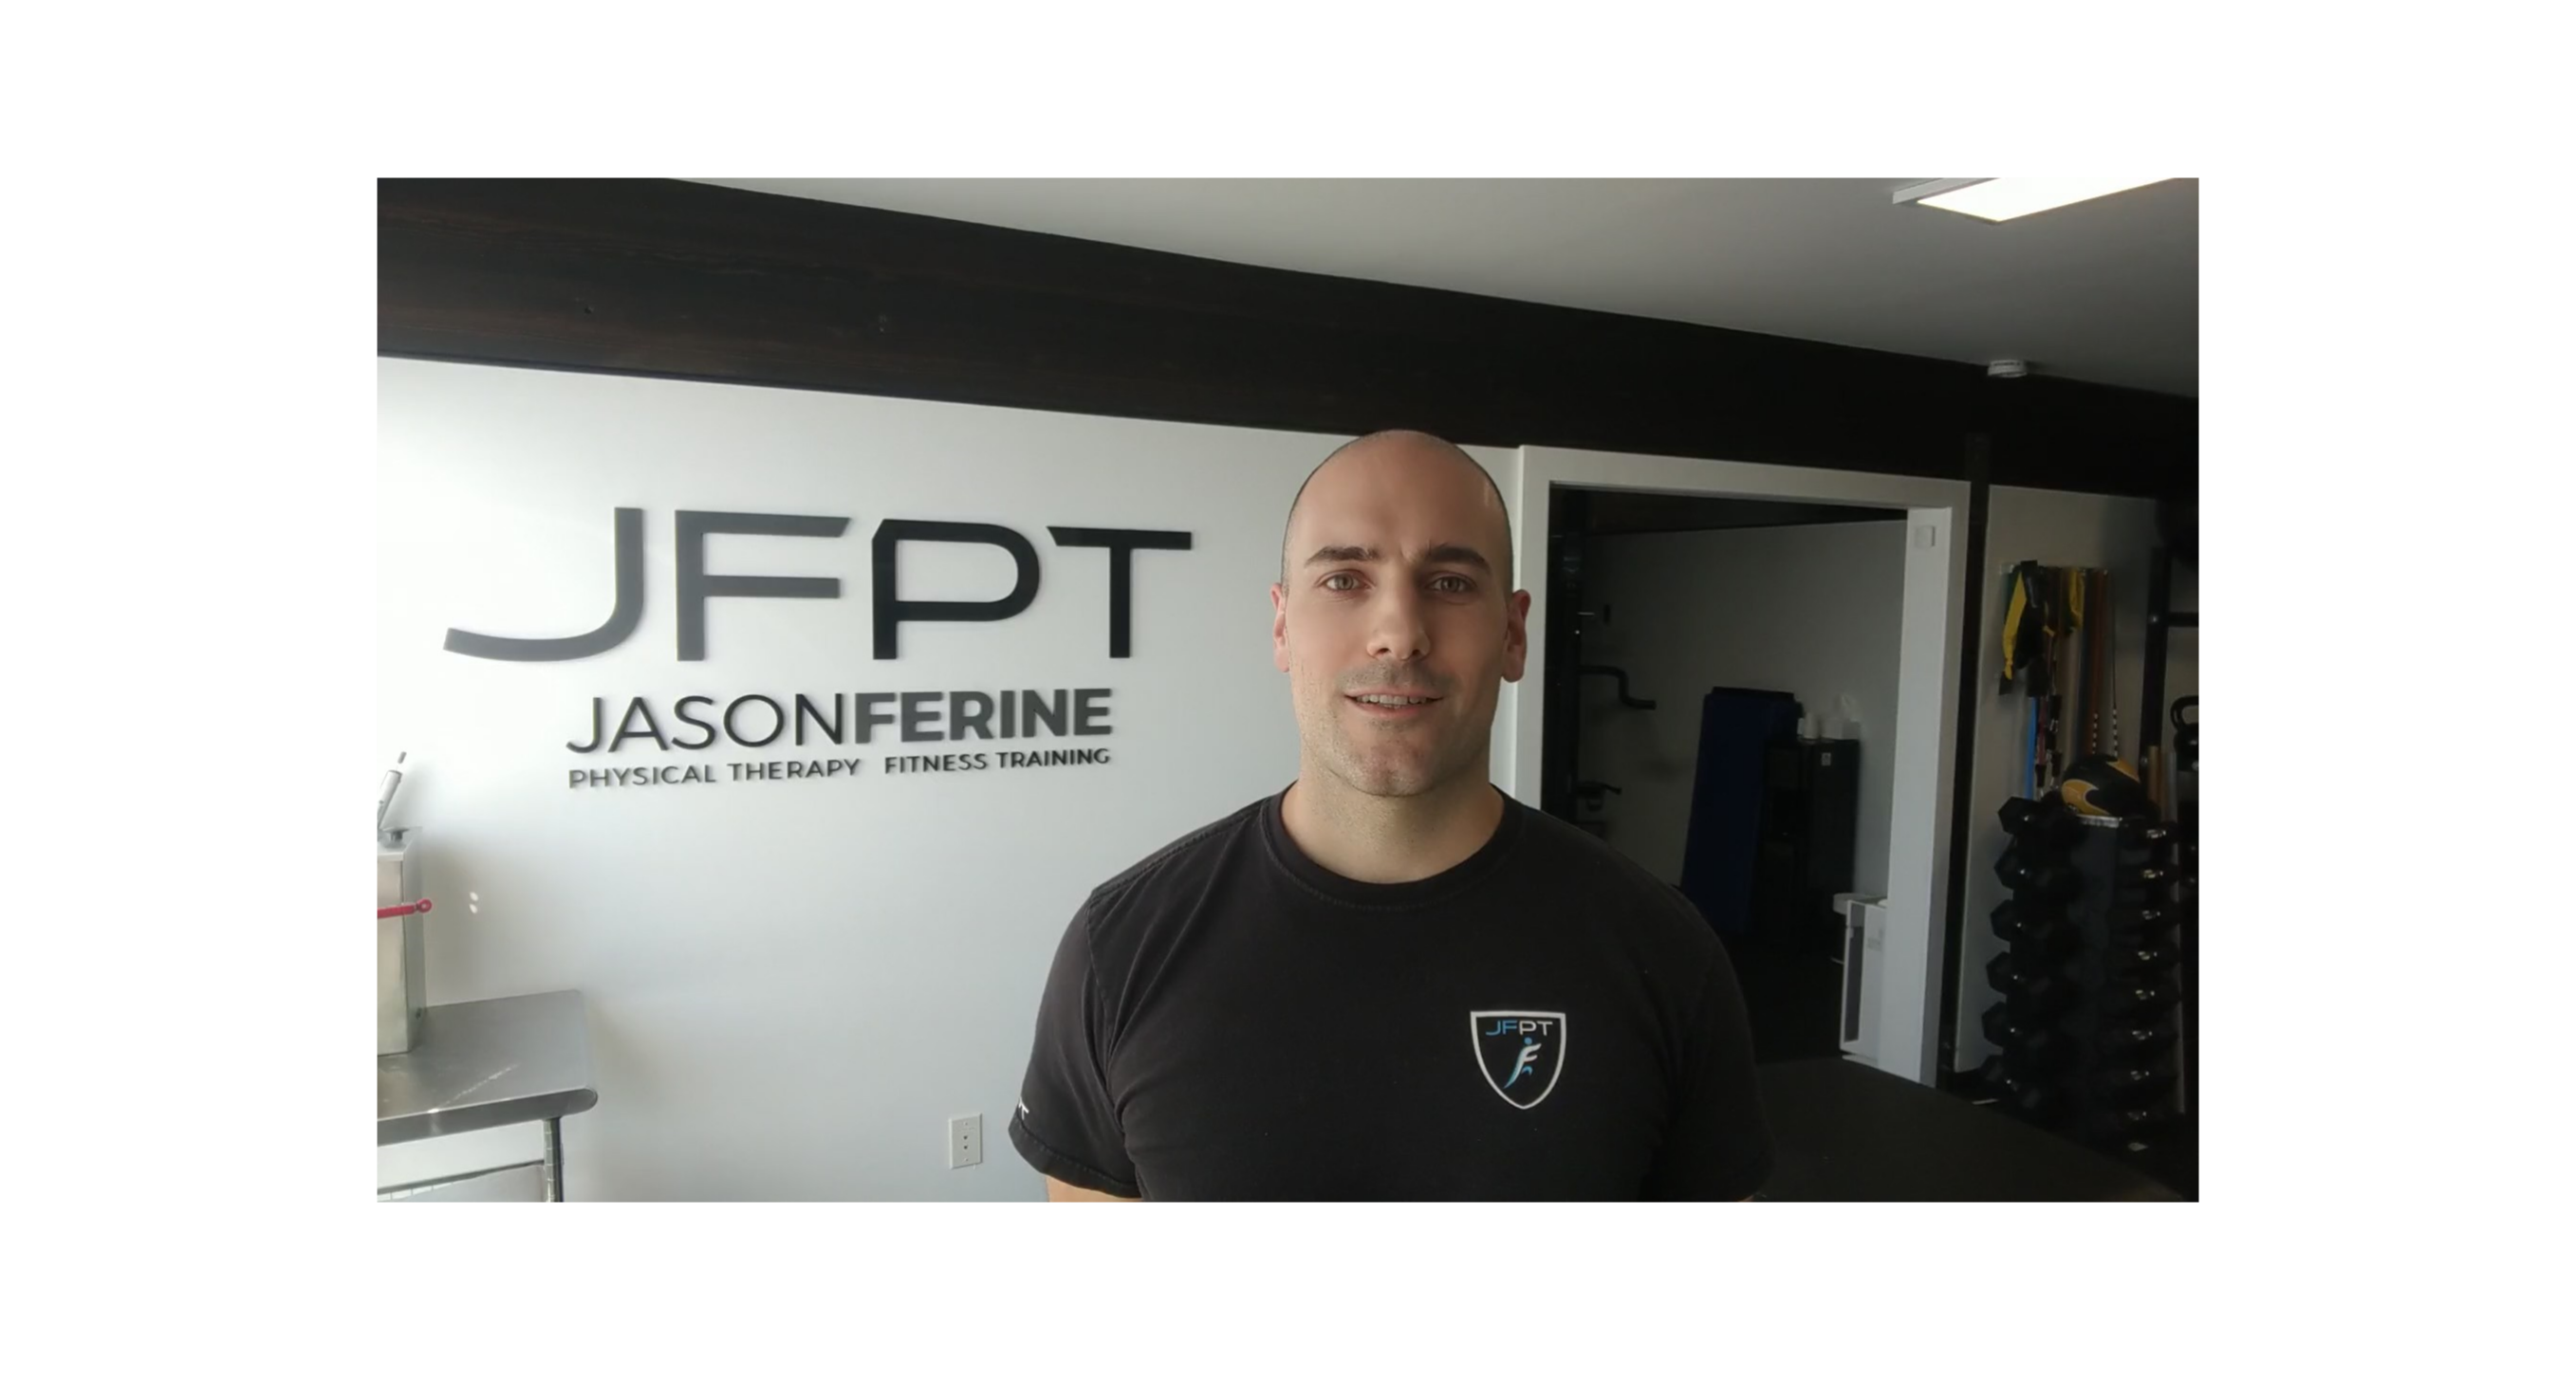 Physical Therapy And Fitness Training - JFPT